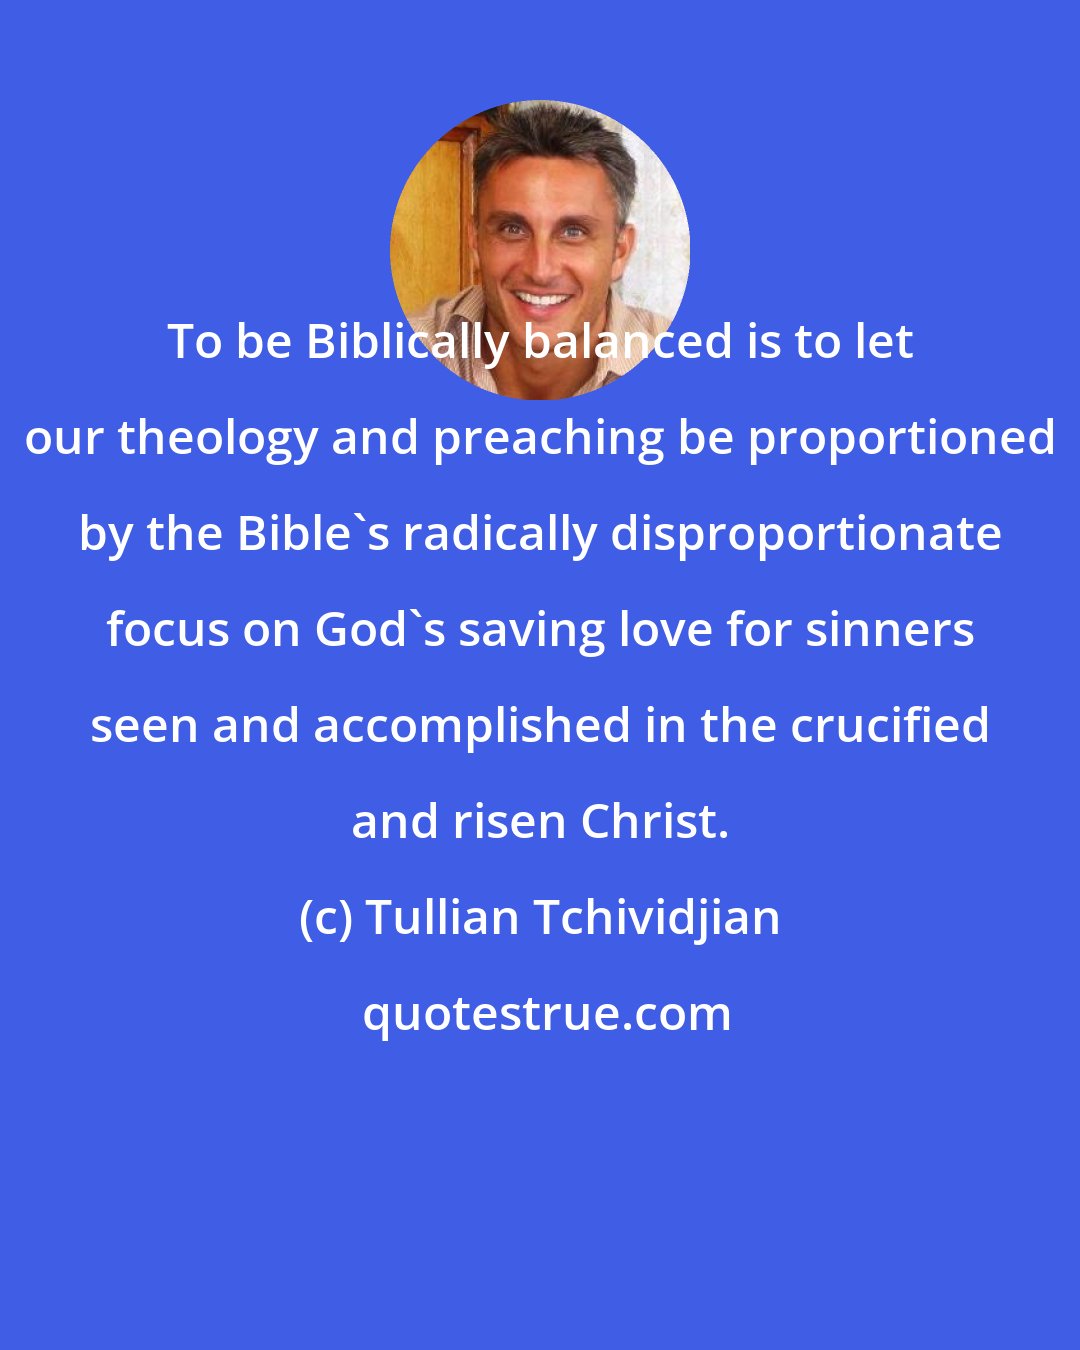 Tullian Tchividjian: To be Biblically balanced is to let our theology and preaching be proportioned by the Bible's radically disproportionate focus on God's saving love for sinners seen and accomplished in the crucified and risen Christ.